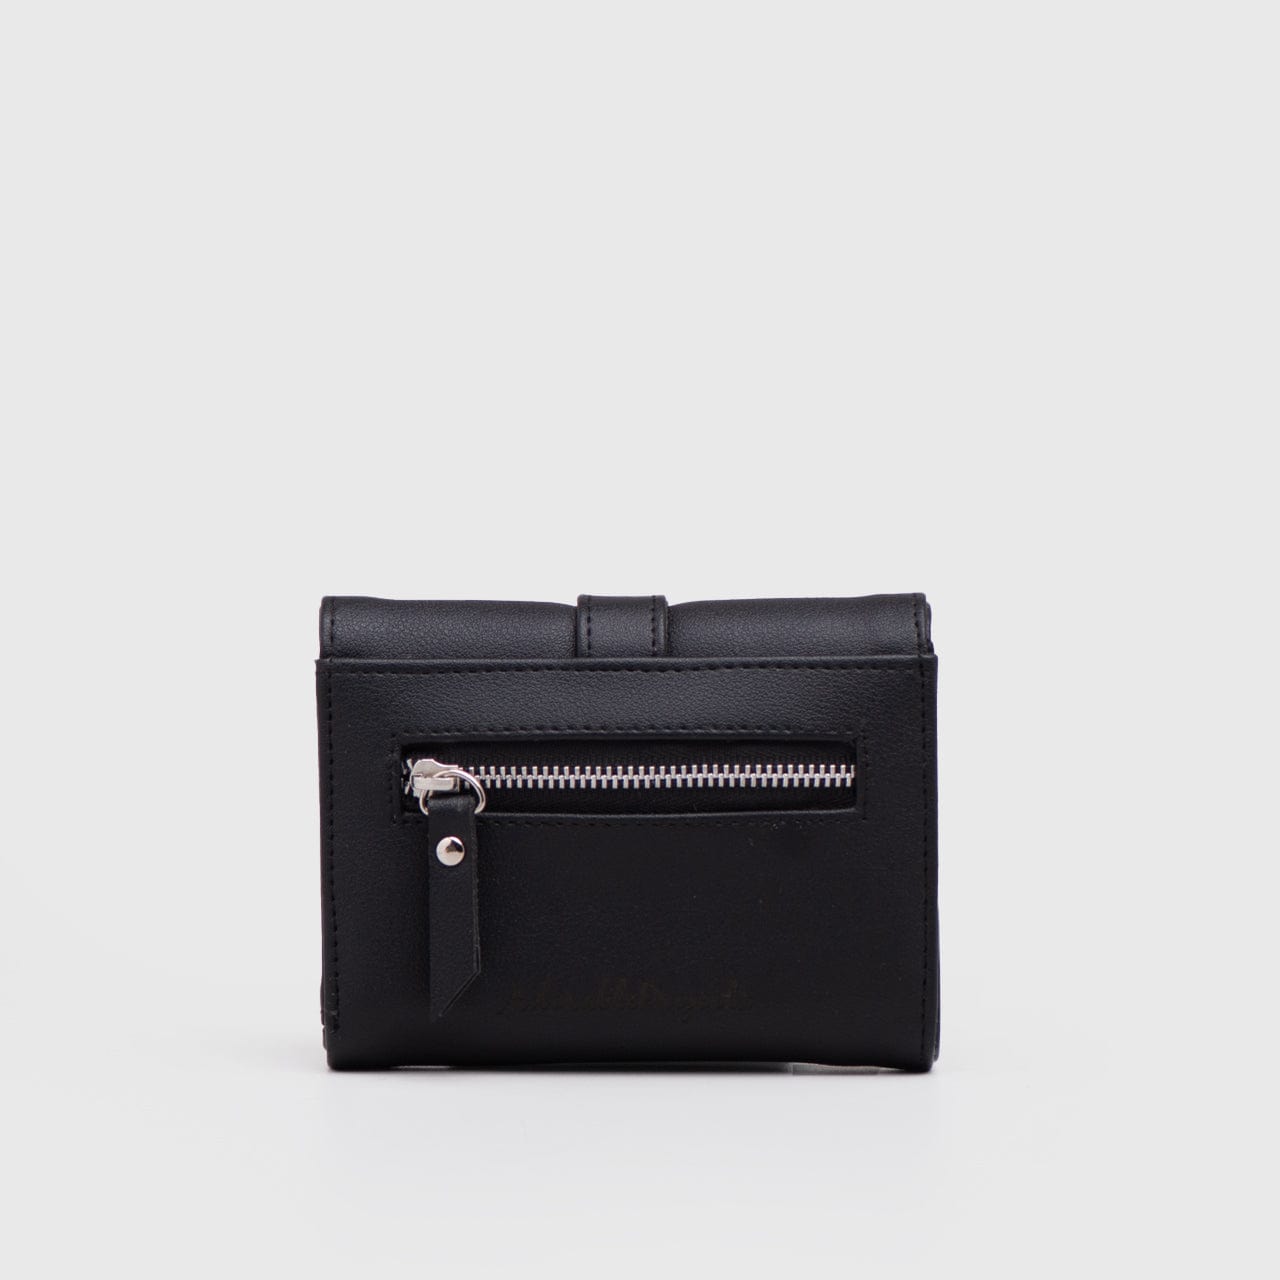 Adorable Projects Official Adorableprojects - Petra Wallet Black - Dompet